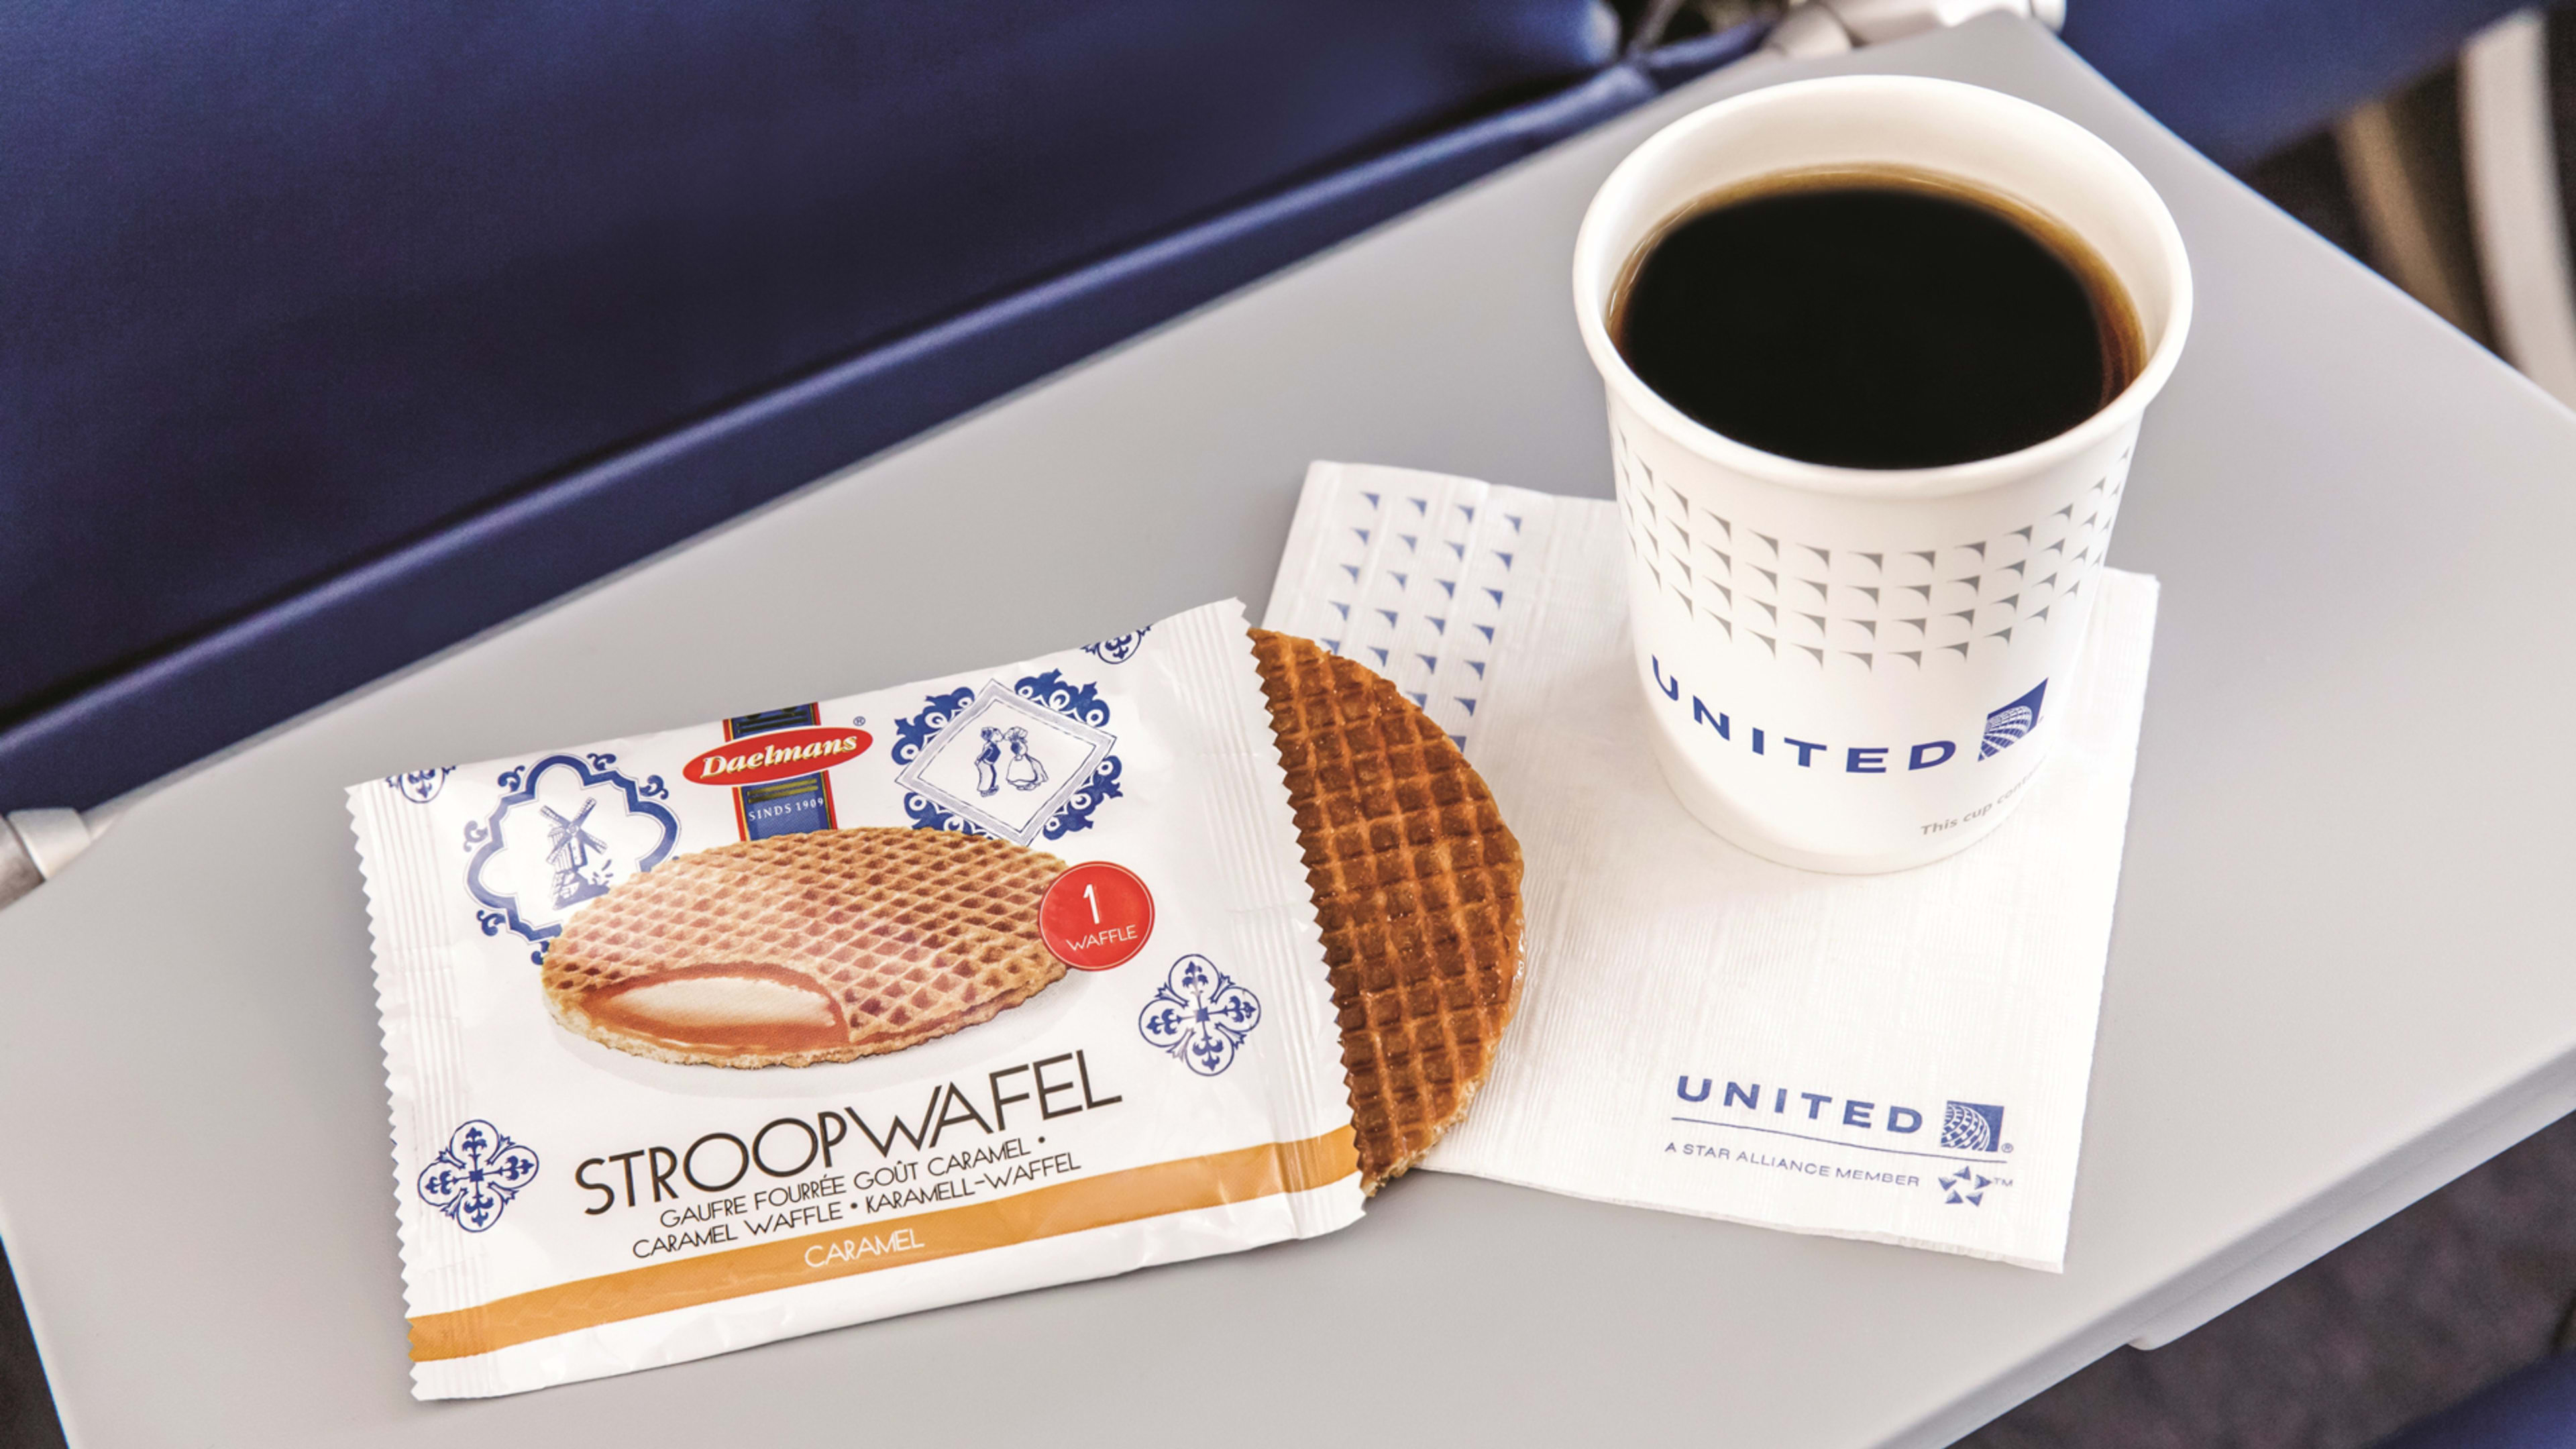 United Airlines risks snack-lash after getting rid of stroopwafels on some flights